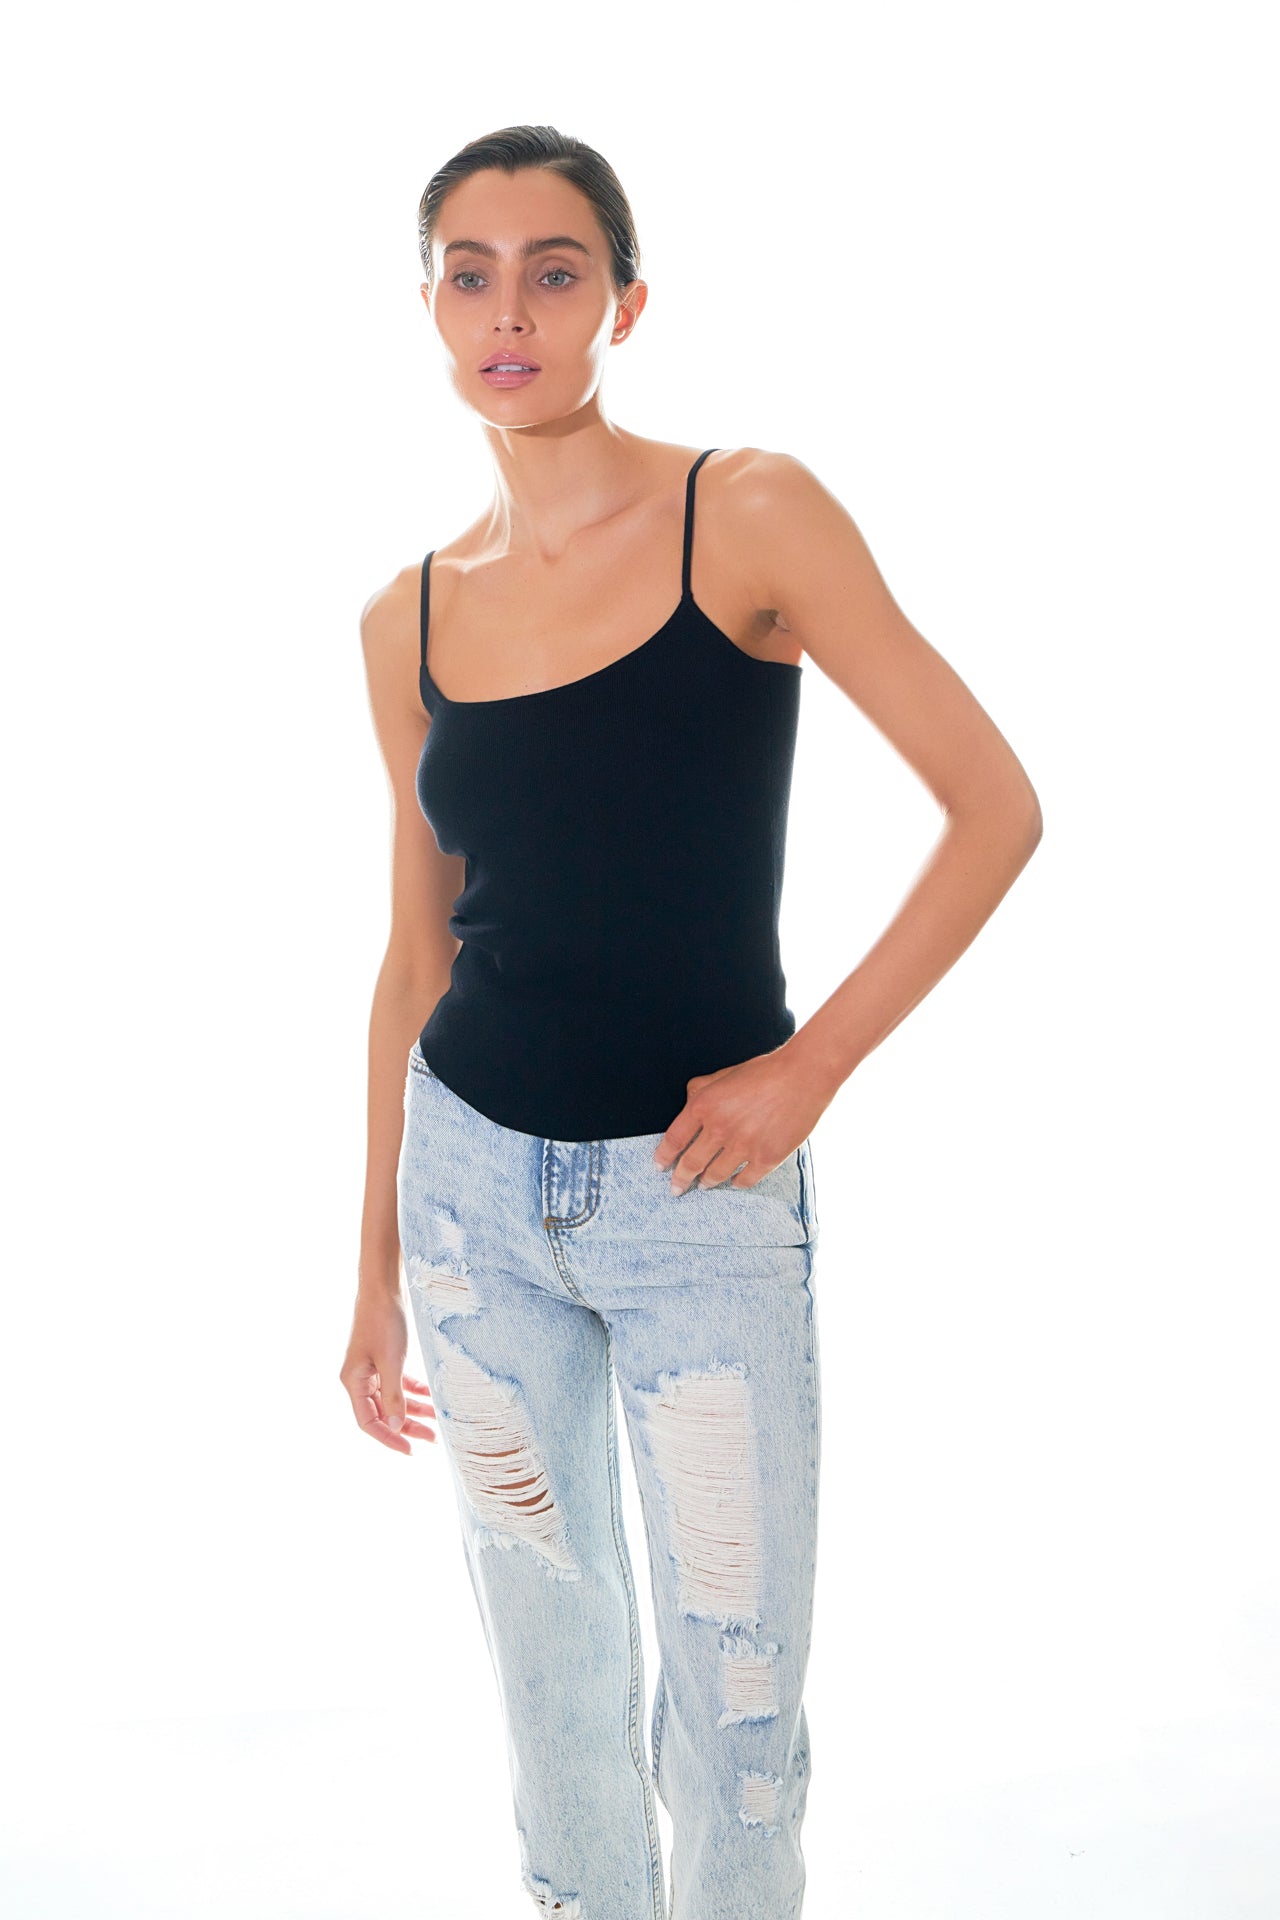 GREY LAB - High-Waisted Distressed Straight Leg Jeans - JEANS available at Objectrare